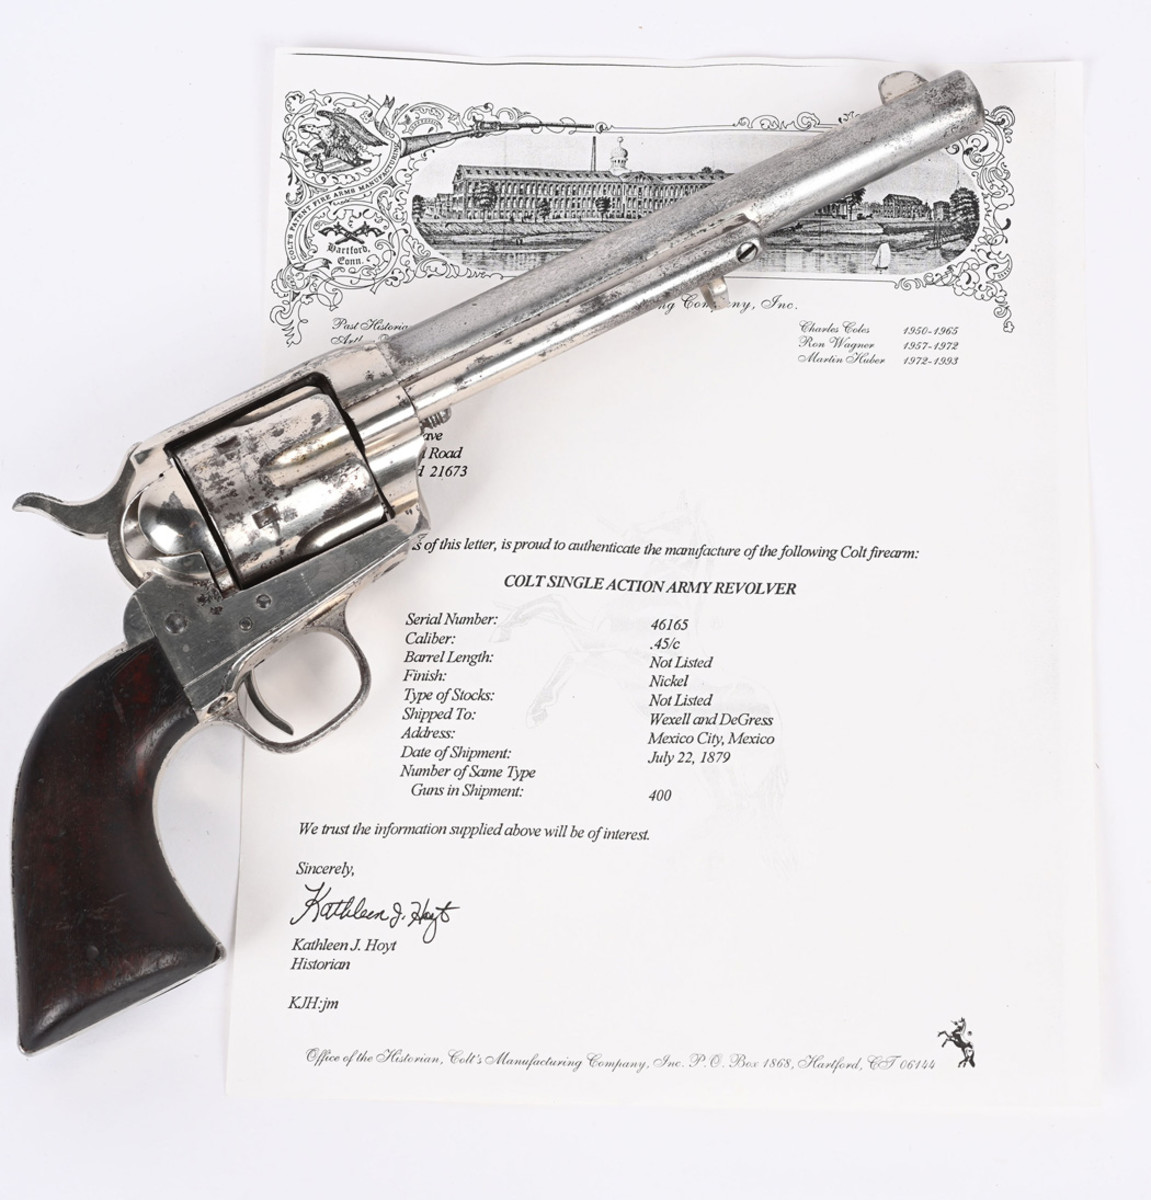 Factory-nickel Colt SAA (Single Action Army) .45-caliber revolver with 7½in barrel, Serial No. 46165, shipped in 1879 to Colt distributor Wexell & DeGress in Mexico City. Part of a 400-gun shipment ordered by Mexican government.